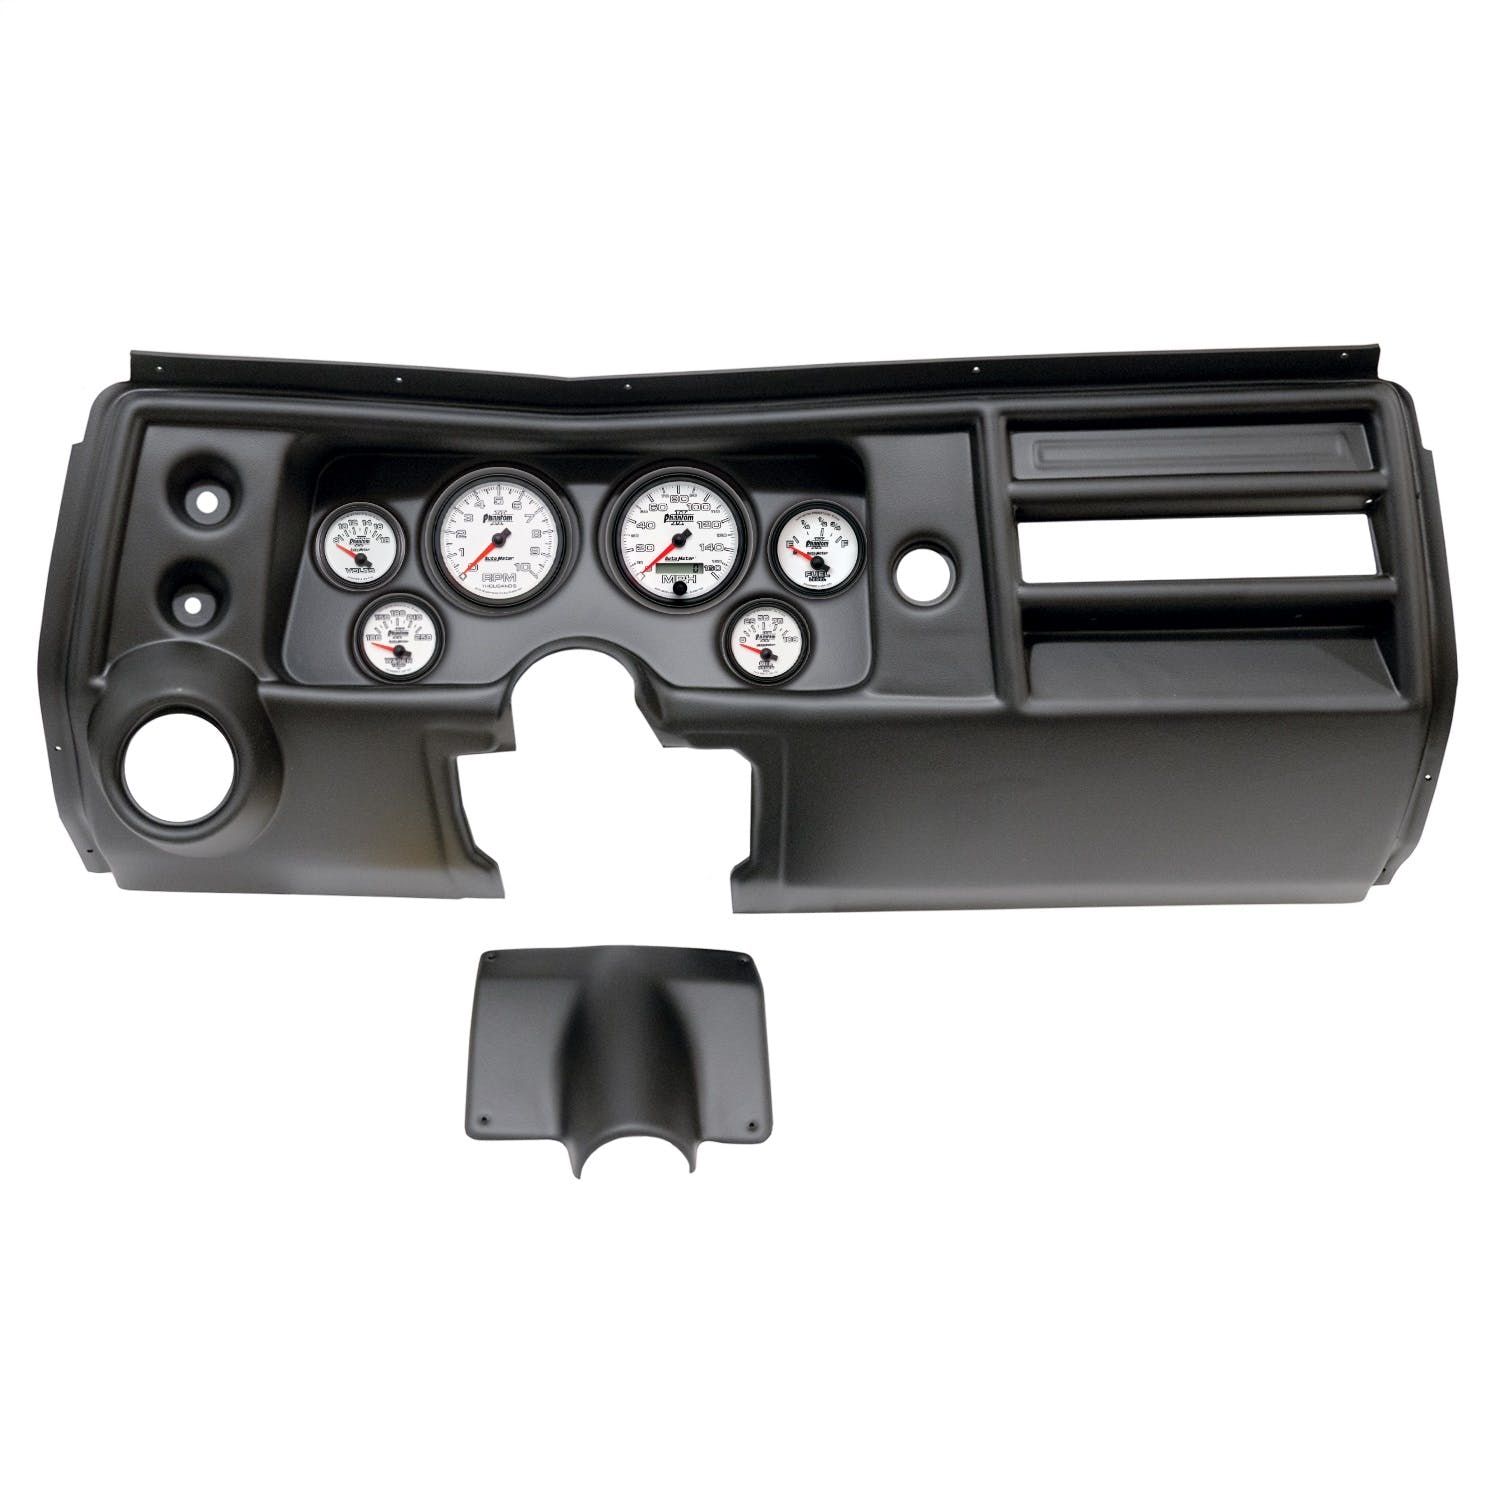 AutoMeter Products 2902-10 6 Gauge Direct-Fit Dash Kit, Chevy Chevelle Vent 68, Phantom II